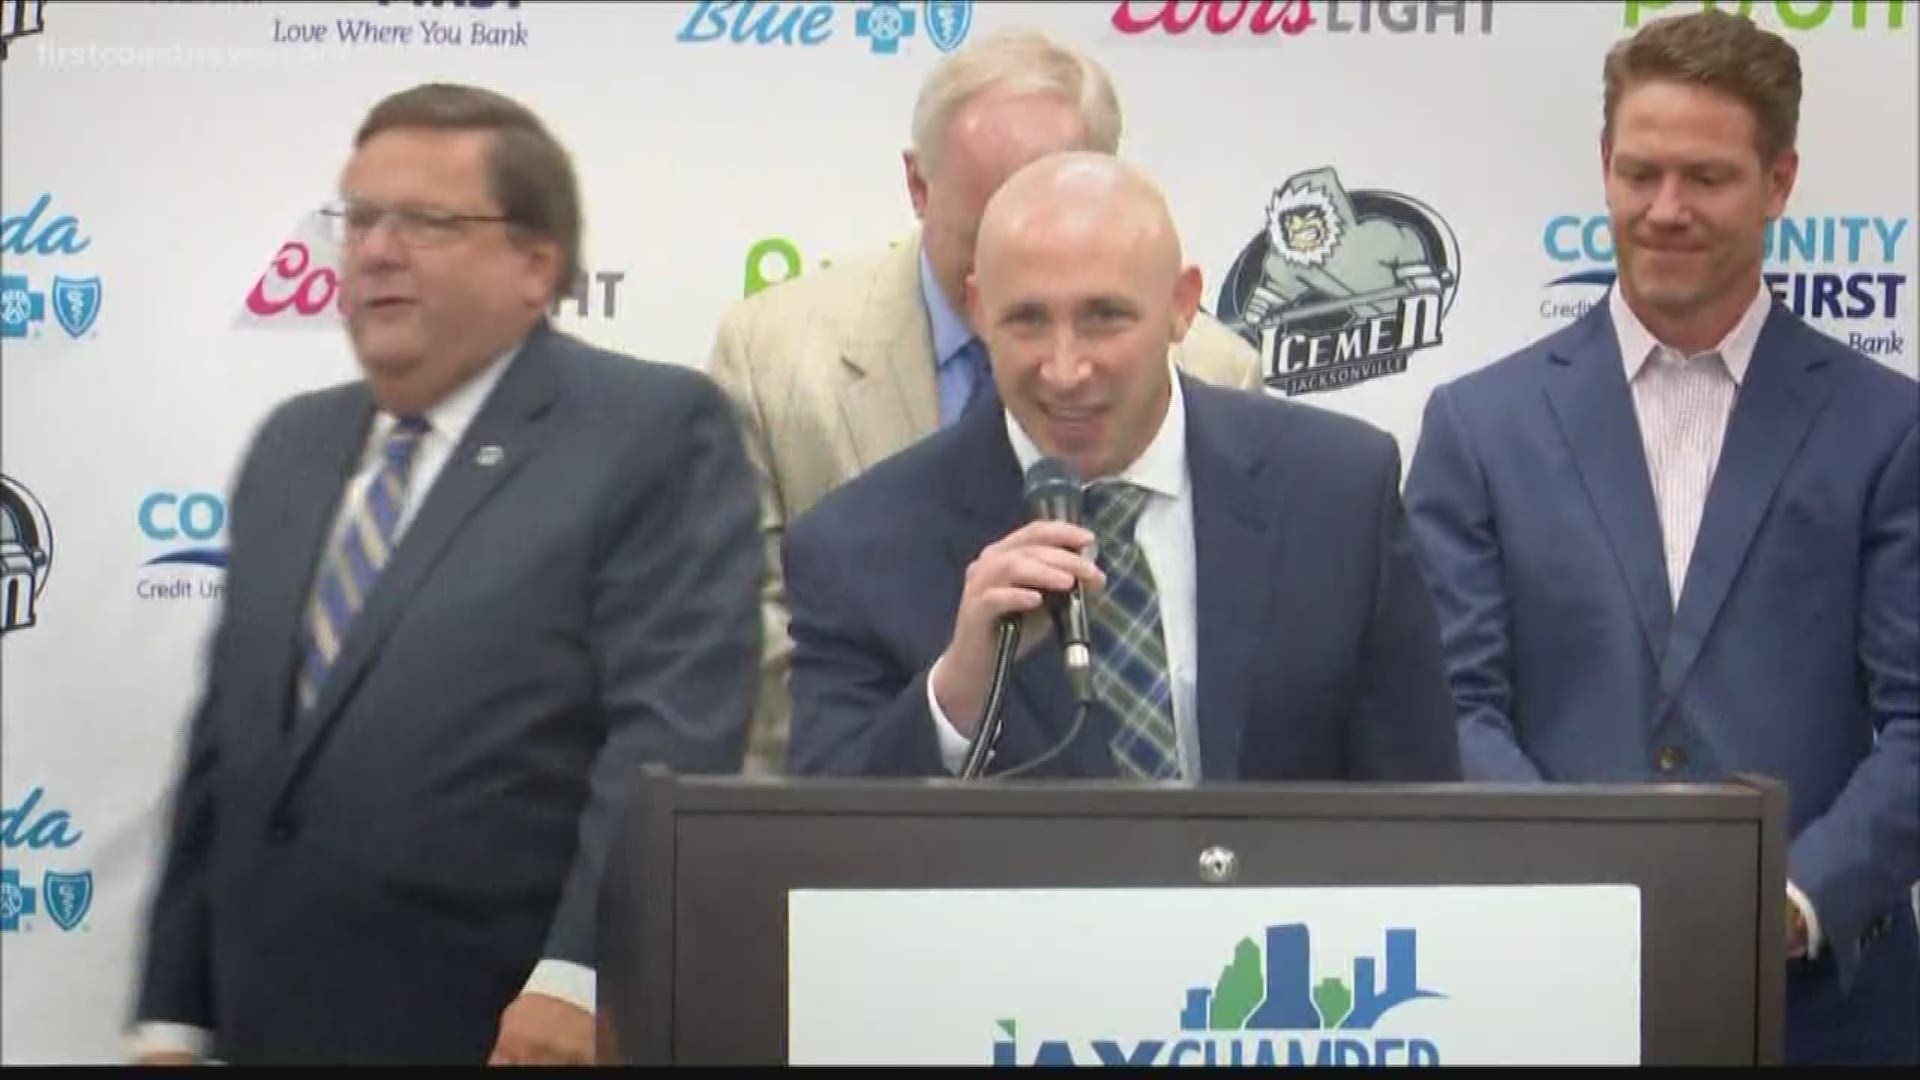 The Jacksonville Icemen announced on Tuesday that the team has been sold to SZH Hockey LLC led by a Jacksonville resident.